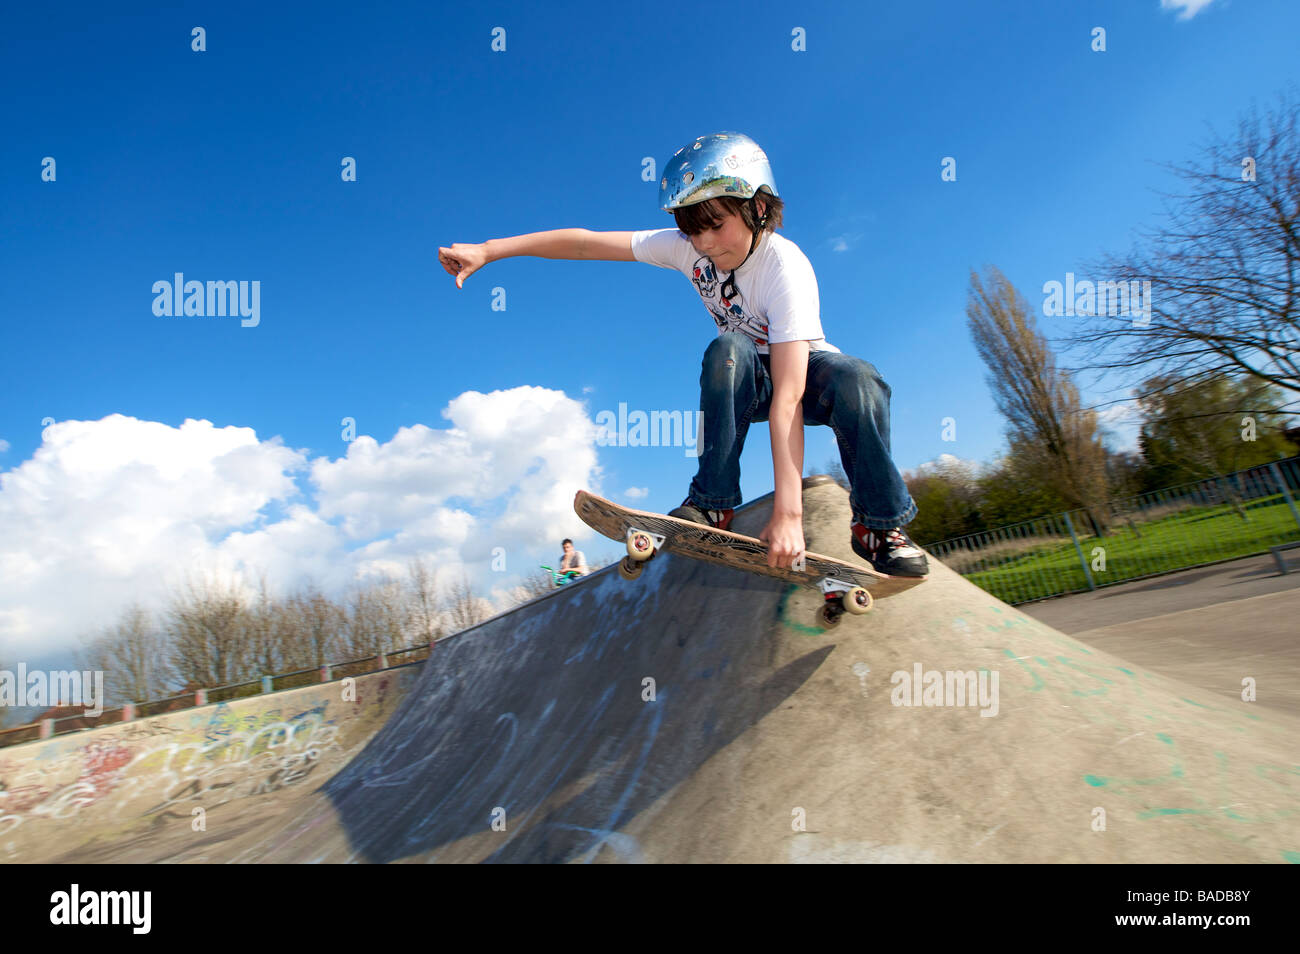 Extreme sport man in action at a concrete skate park on a skateboard Stock Photo Alamy